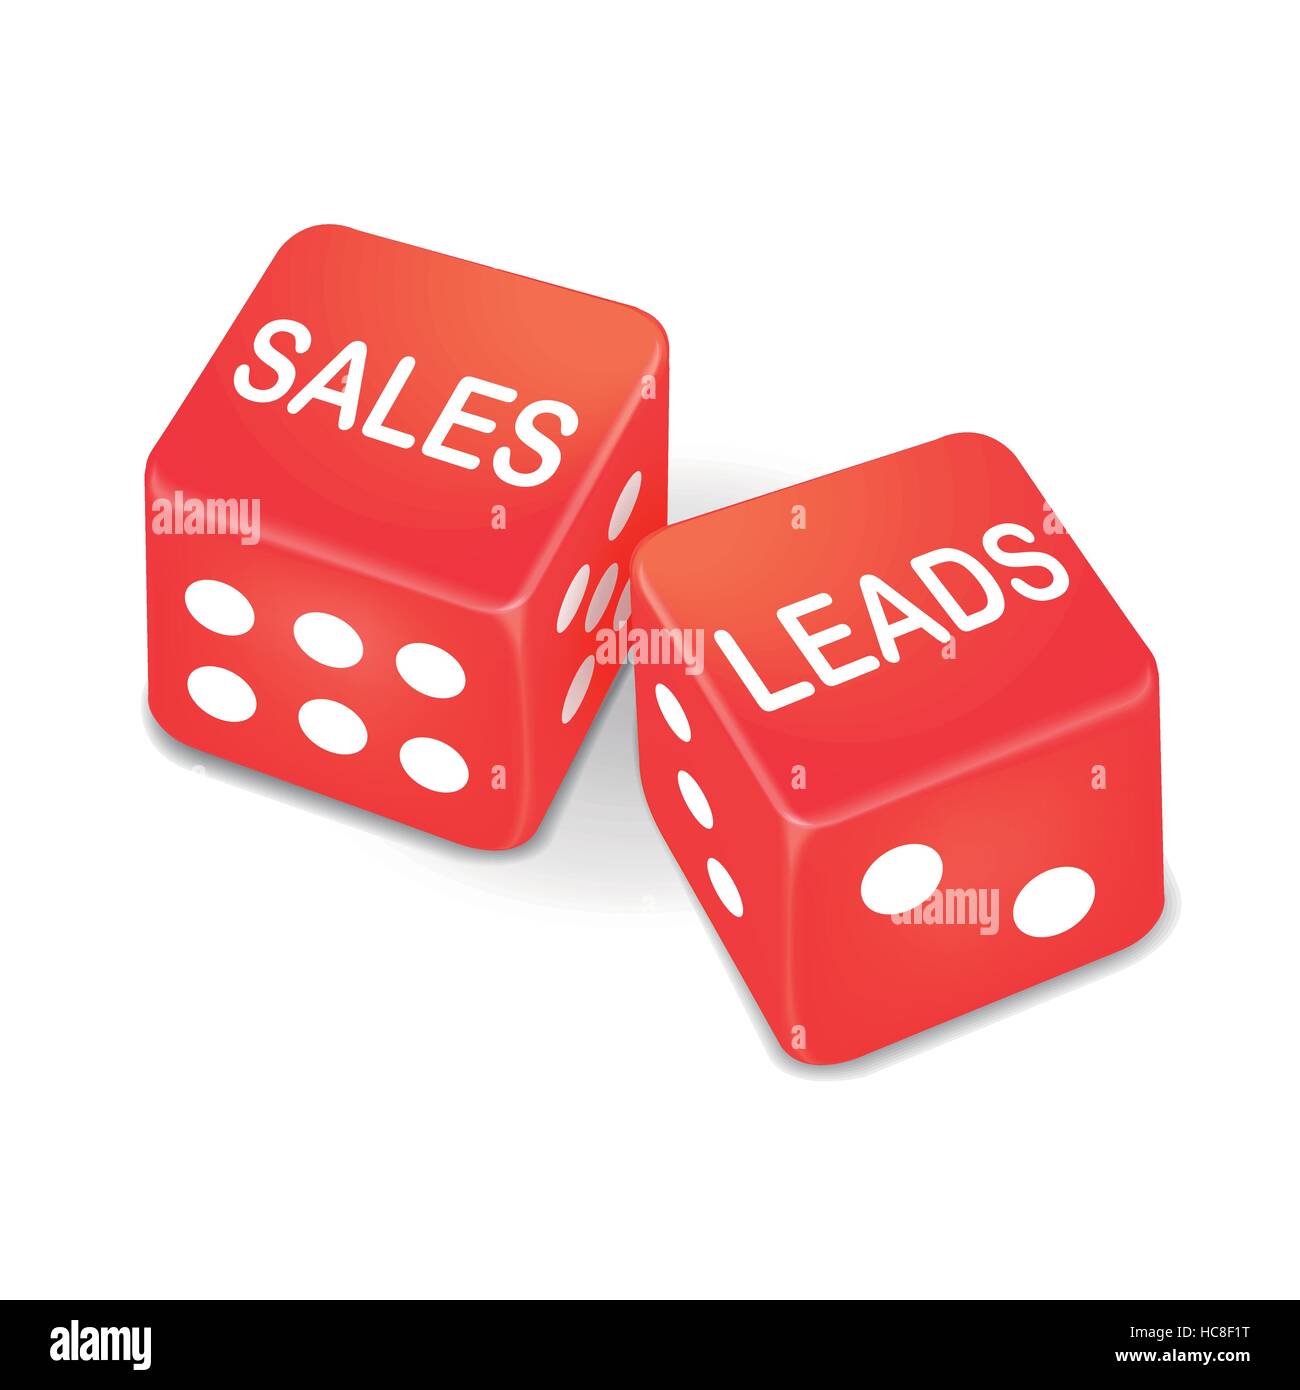 sales leads words on two red dice over white background Stock Vector